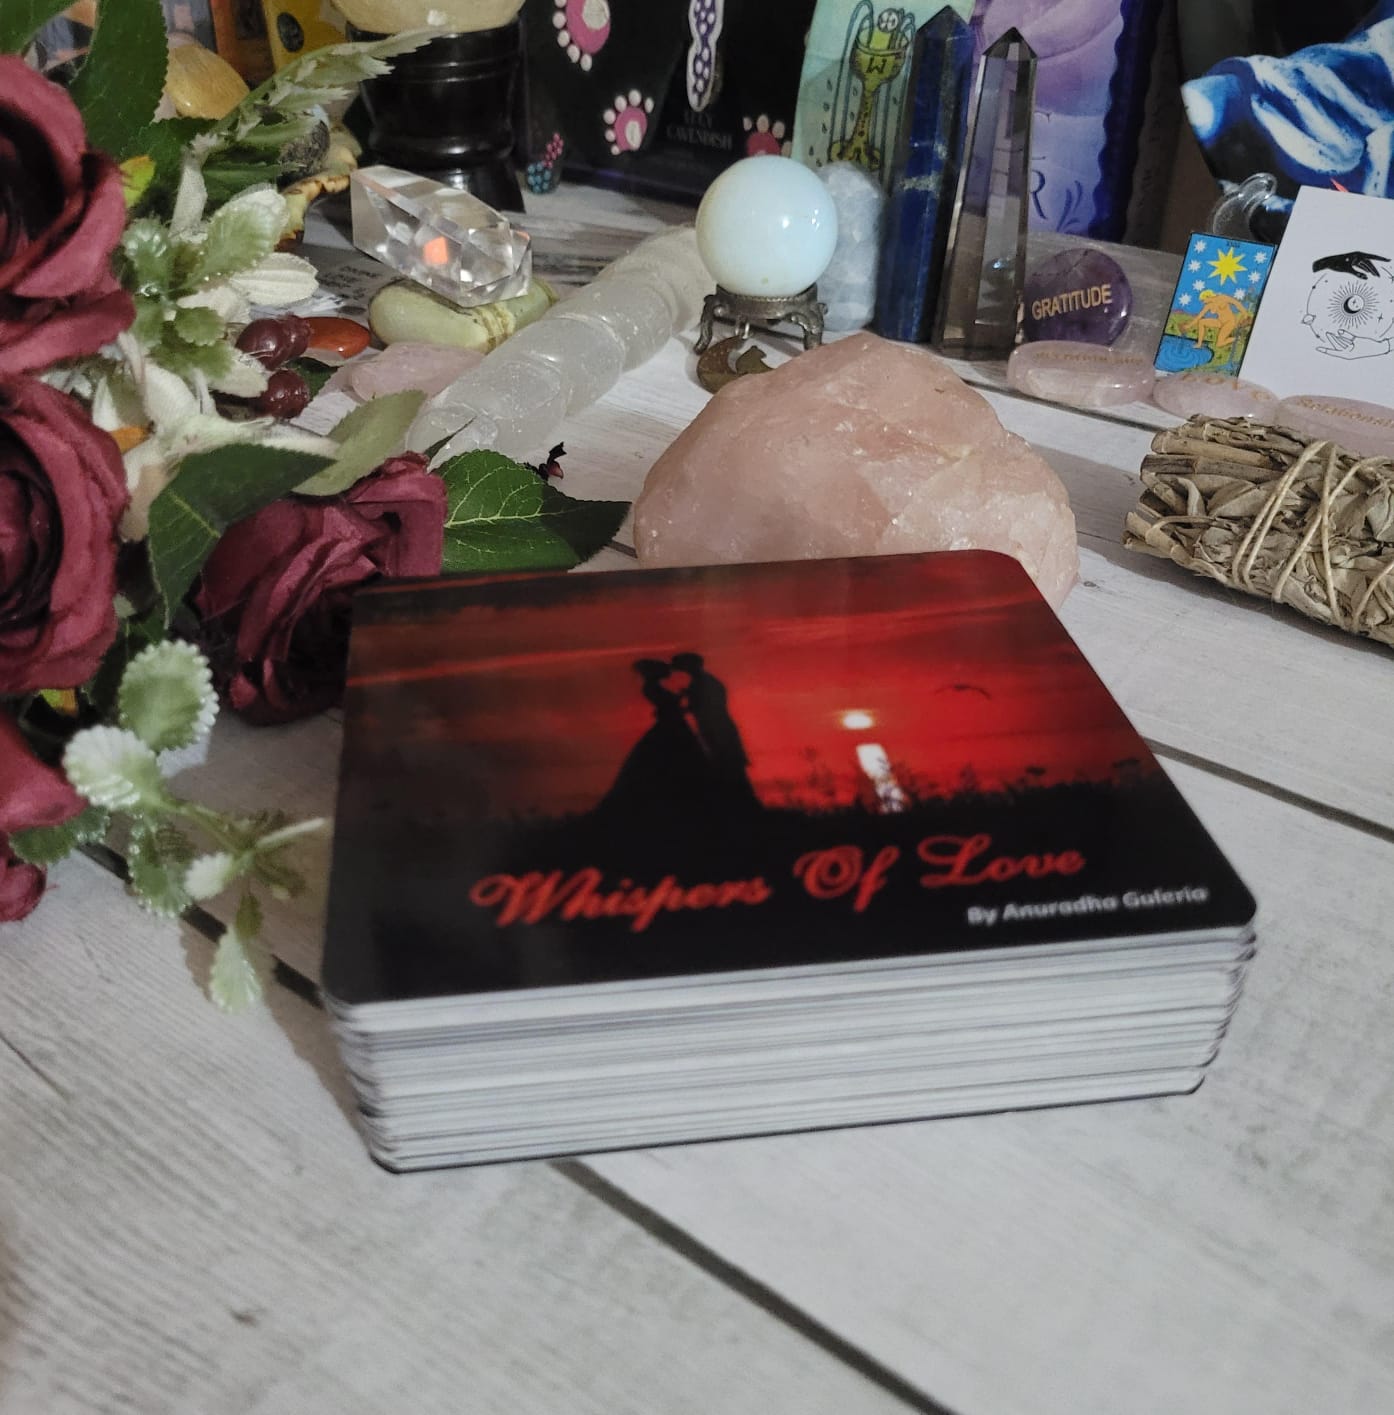 Whispers of Love Oracle cards